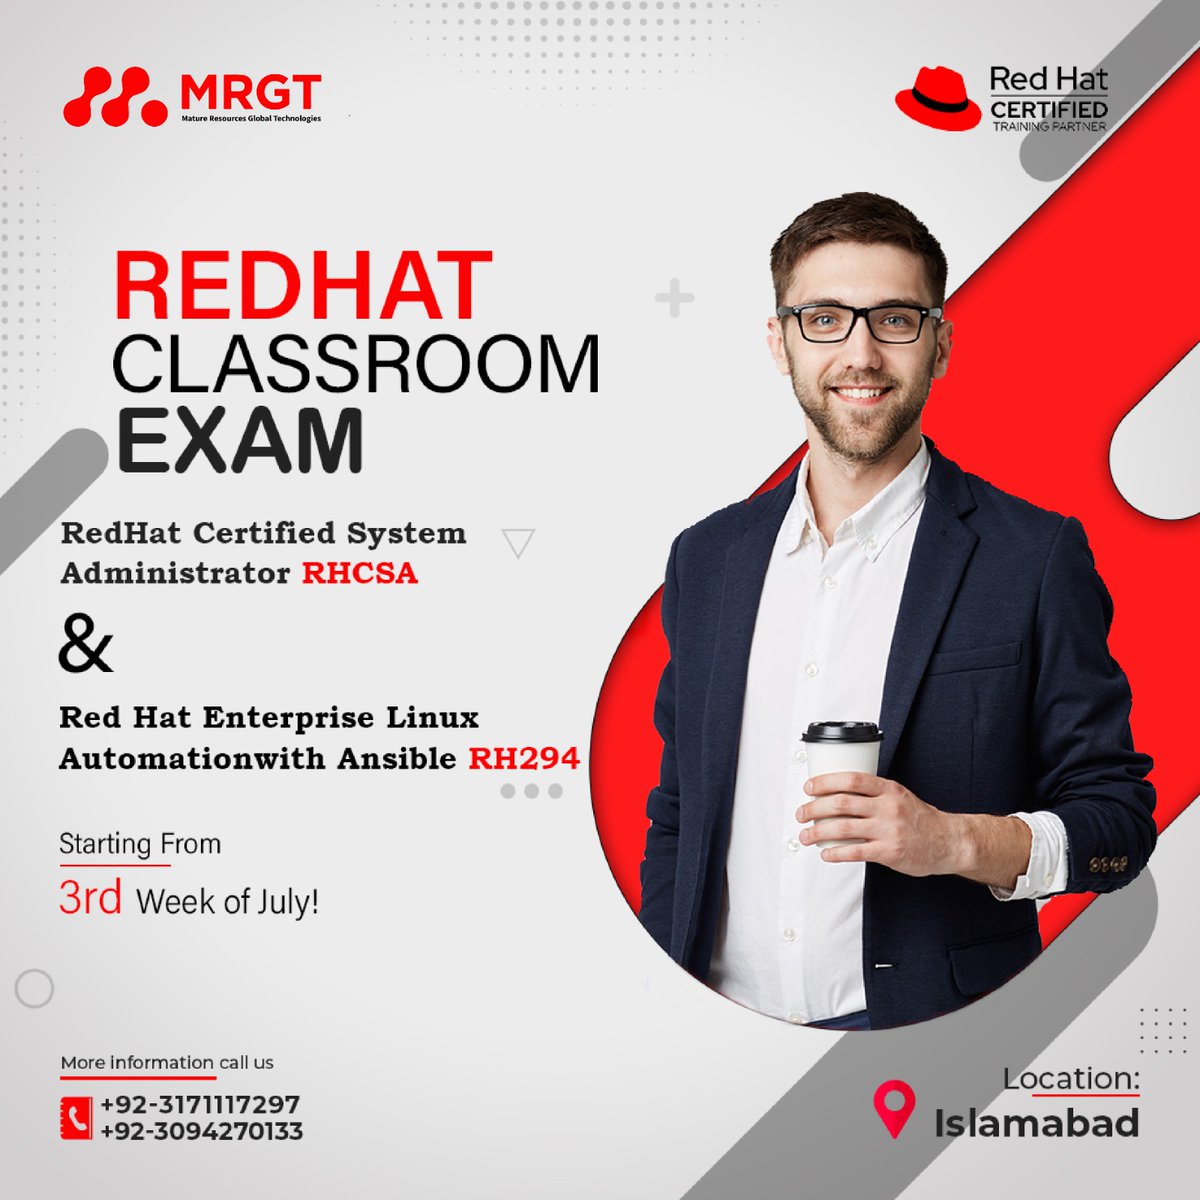 MRGT brings you a great offer. Limited Seats Are Left for Red Hat Certified System Administrator (RHCSA) and Red Hat Enterprise Linux Automation With Ansible (RH294) Classroom Exam.

For Further details 
contact us Mob: 0317 1117297  

#training #redhat #RedhatCertification